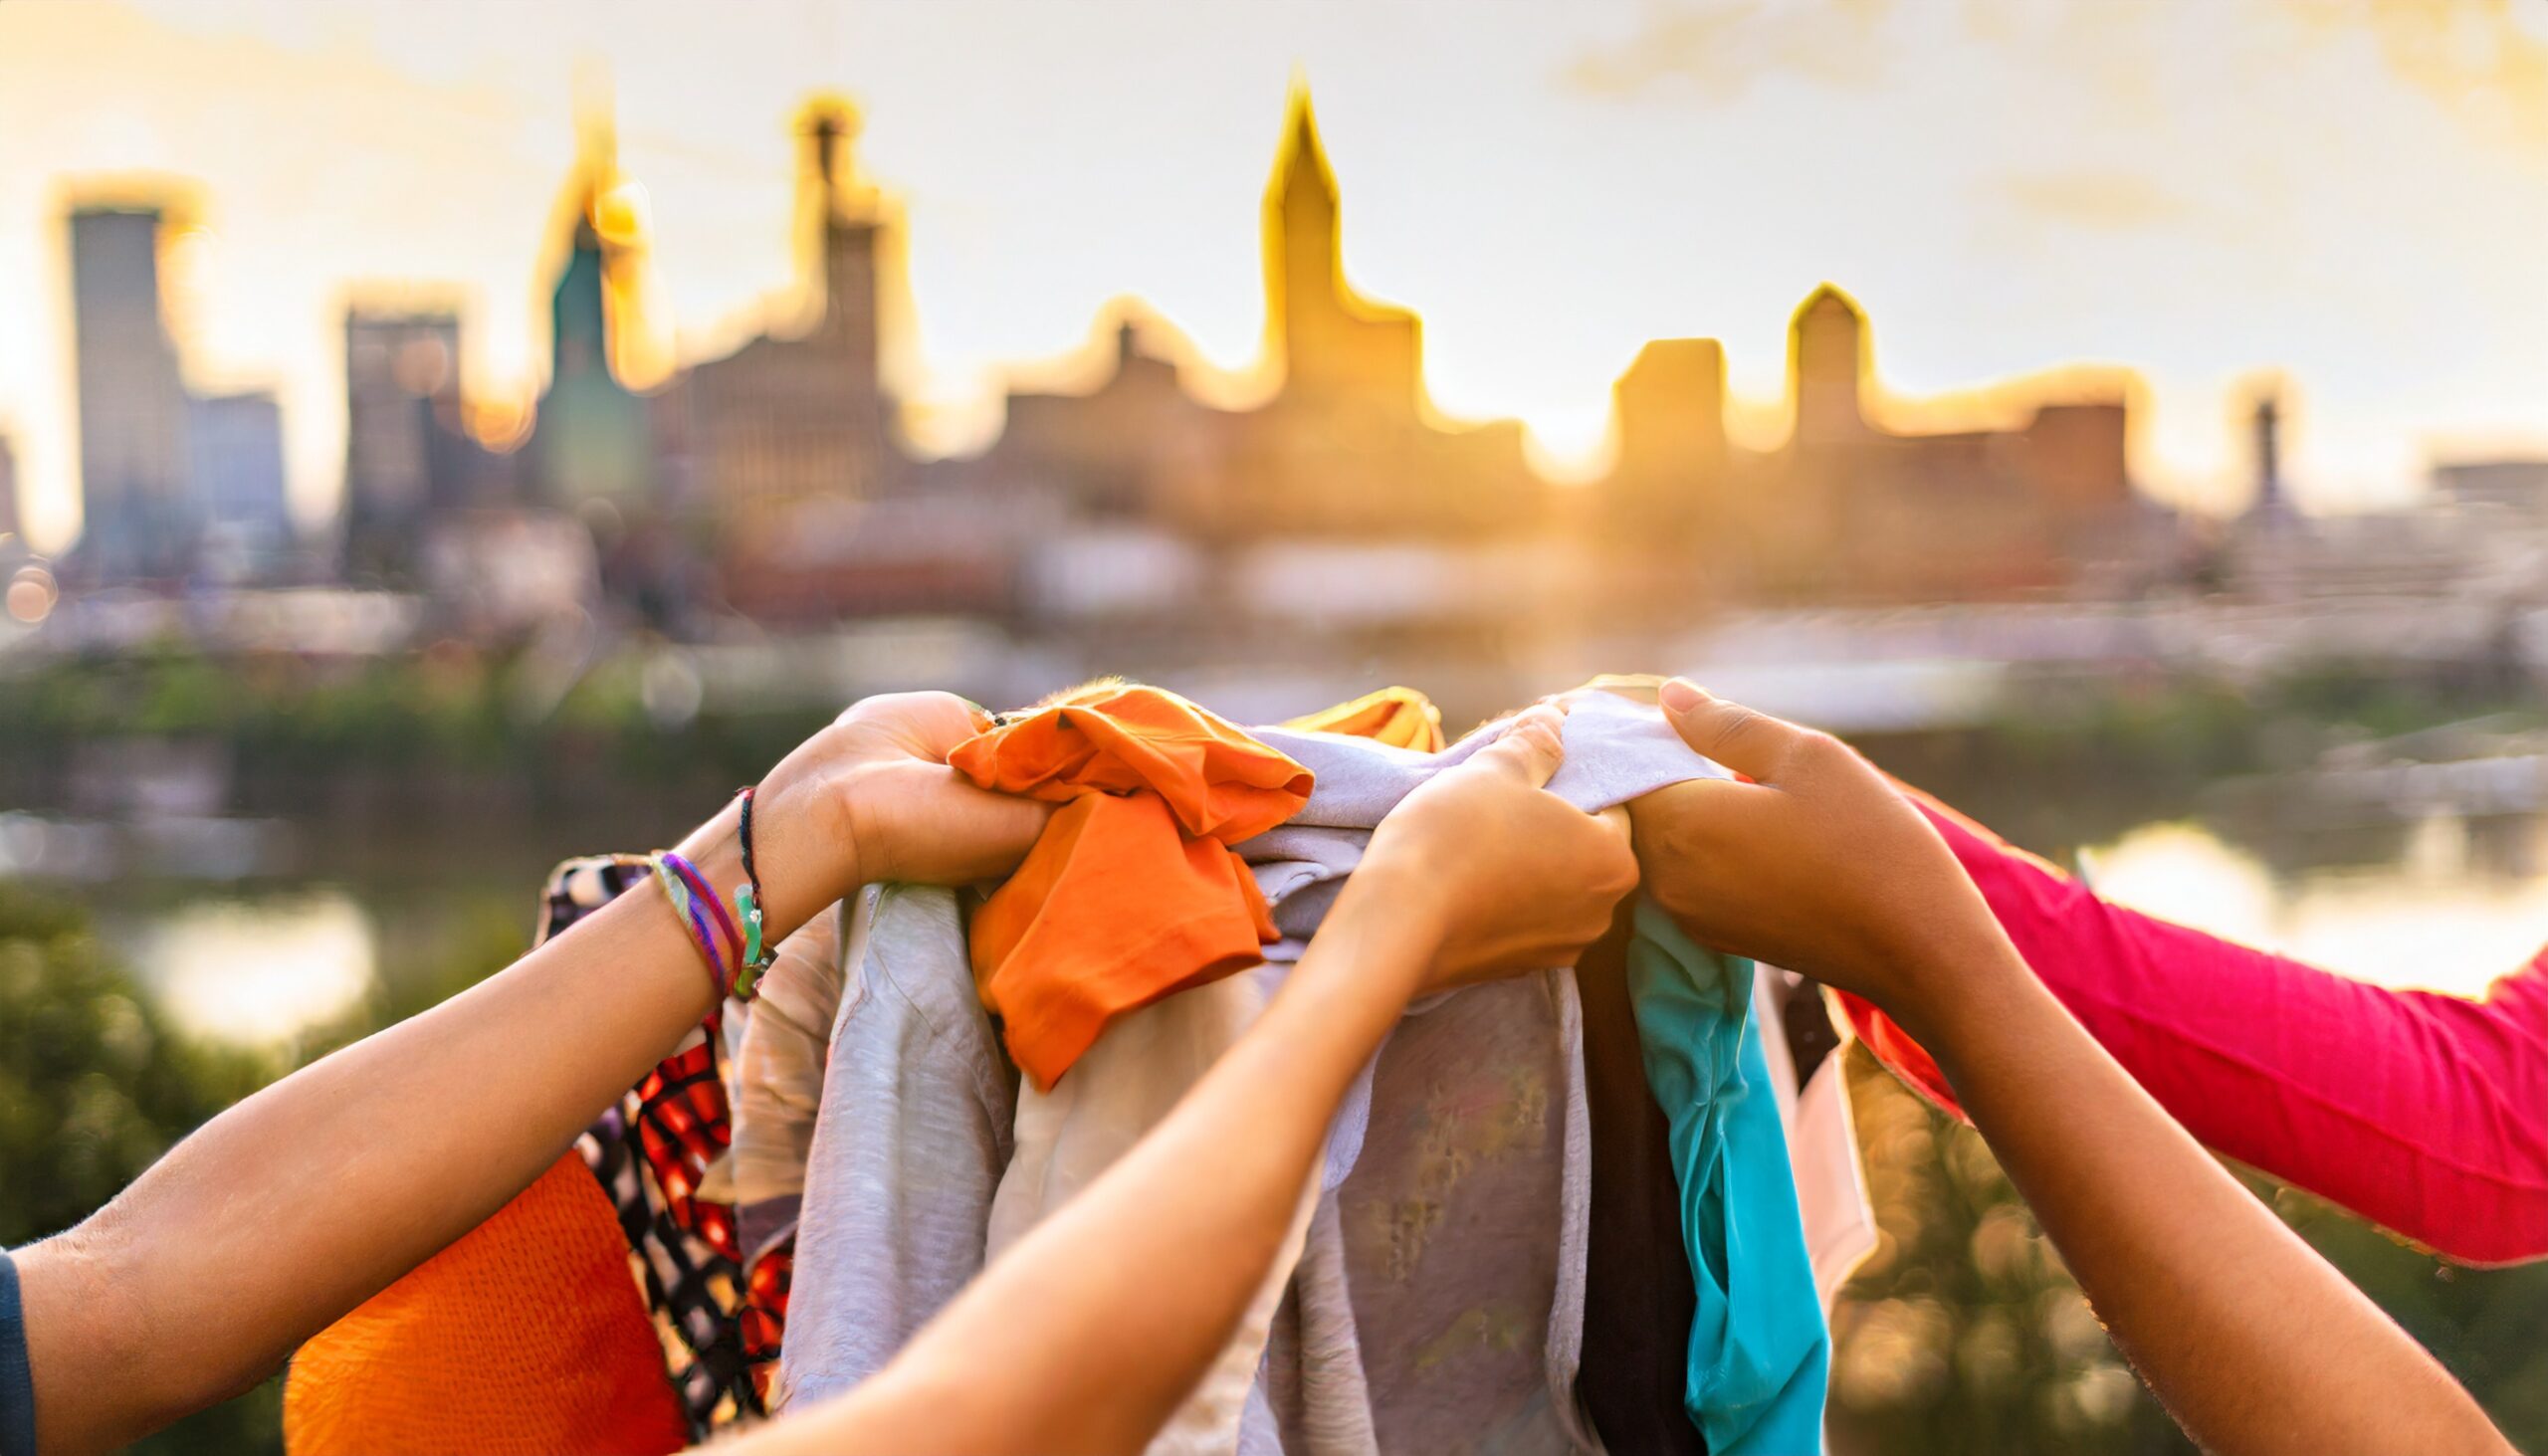 Diverse hands holding clothes with Nashville skyline in the background, representing how to donate clothes in Nashville with ThriftSmart.